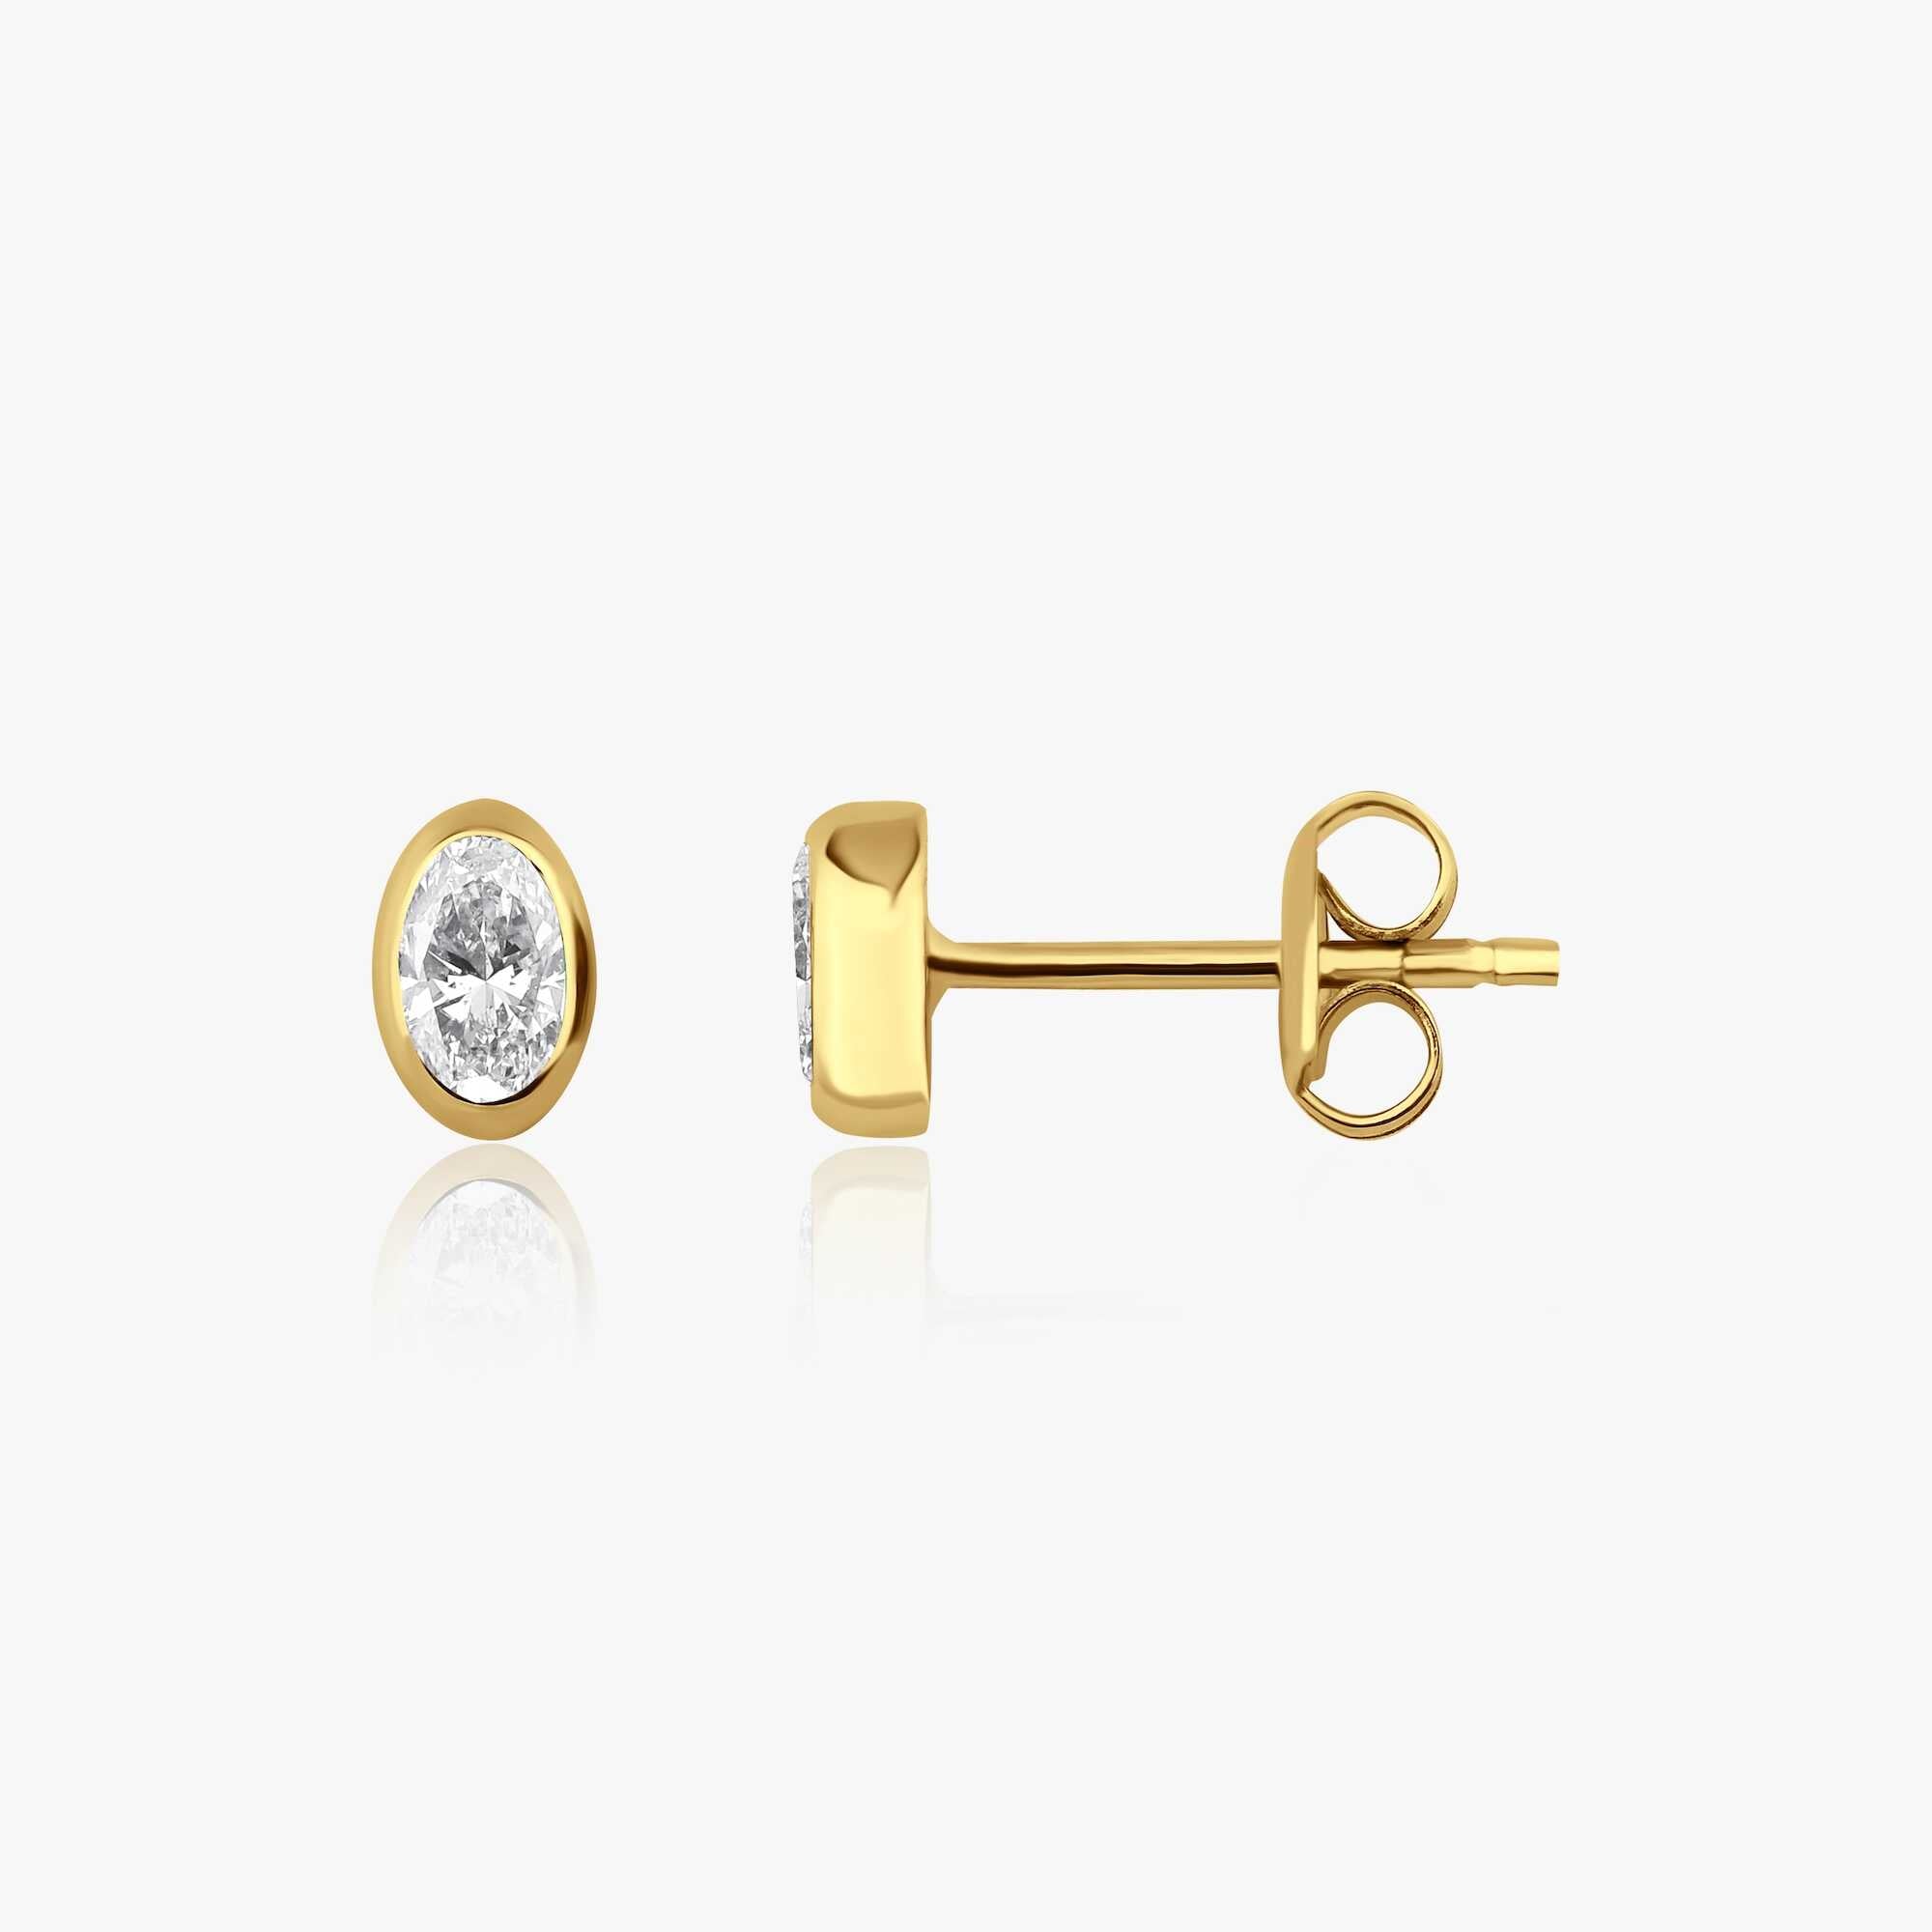 Oval Cut Diamond Stud Earrings Available in 14K and 18K Gold